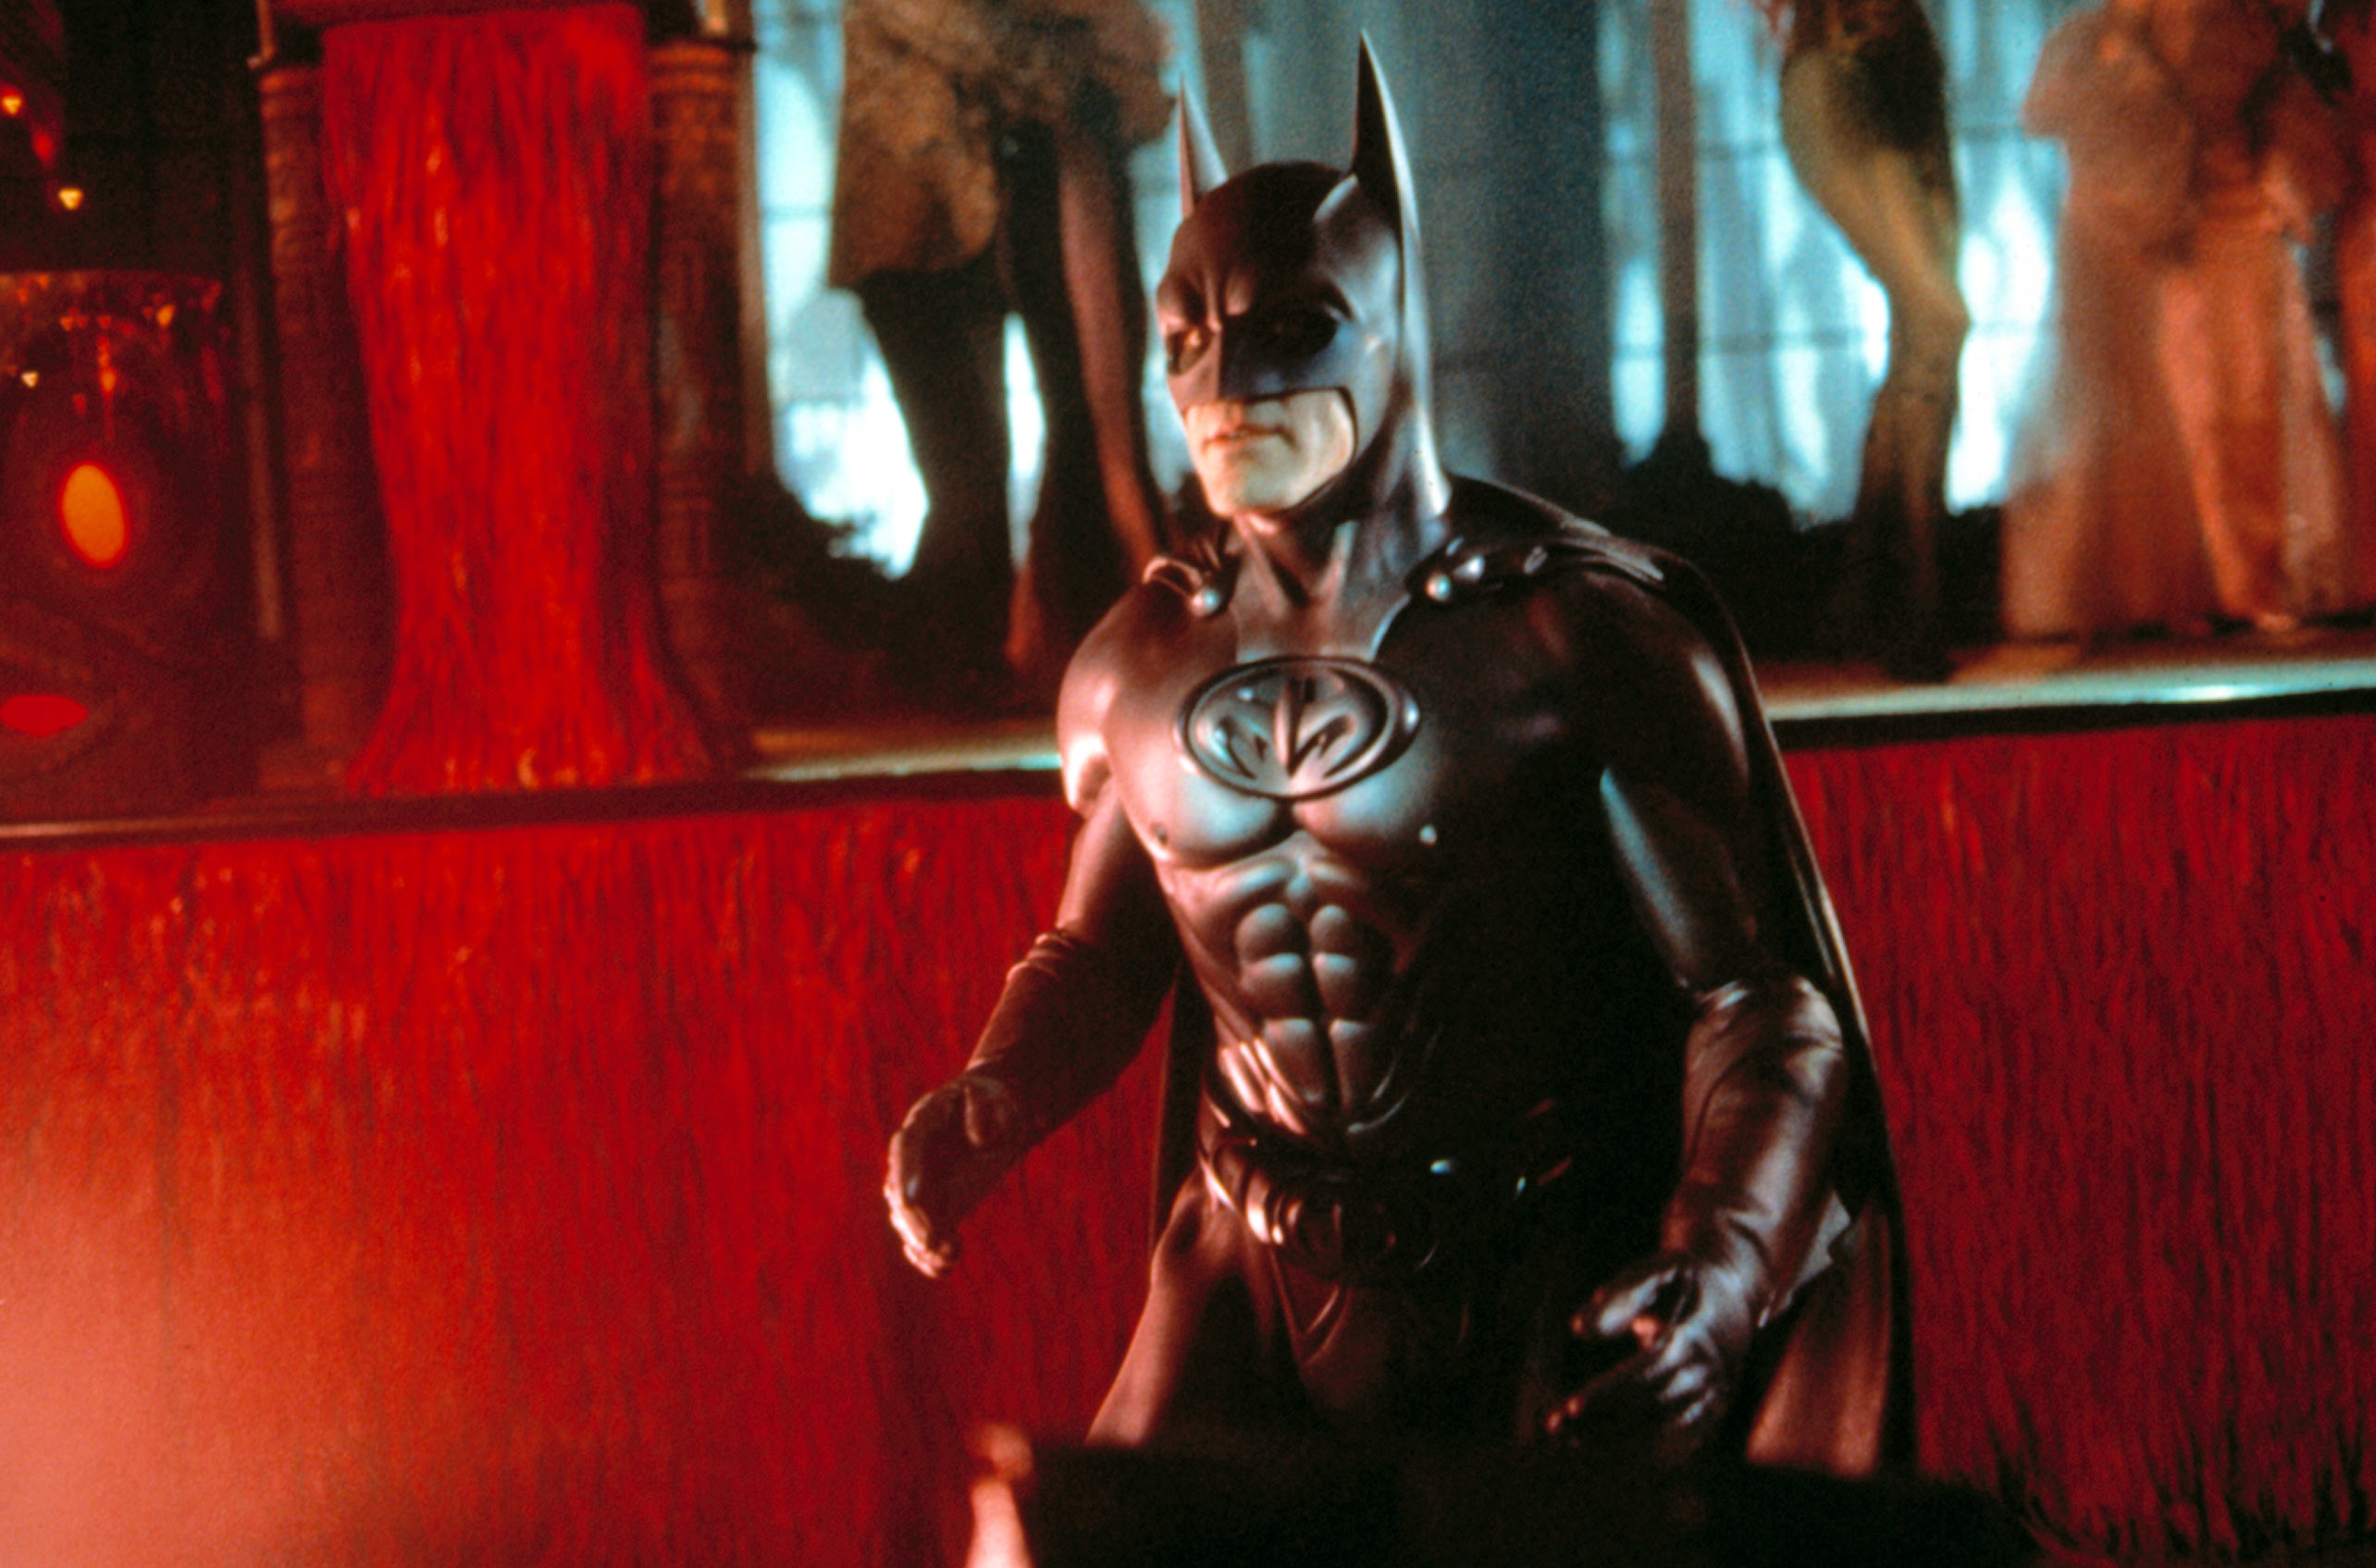 Batman in a sculpted batsuit stands poised for action